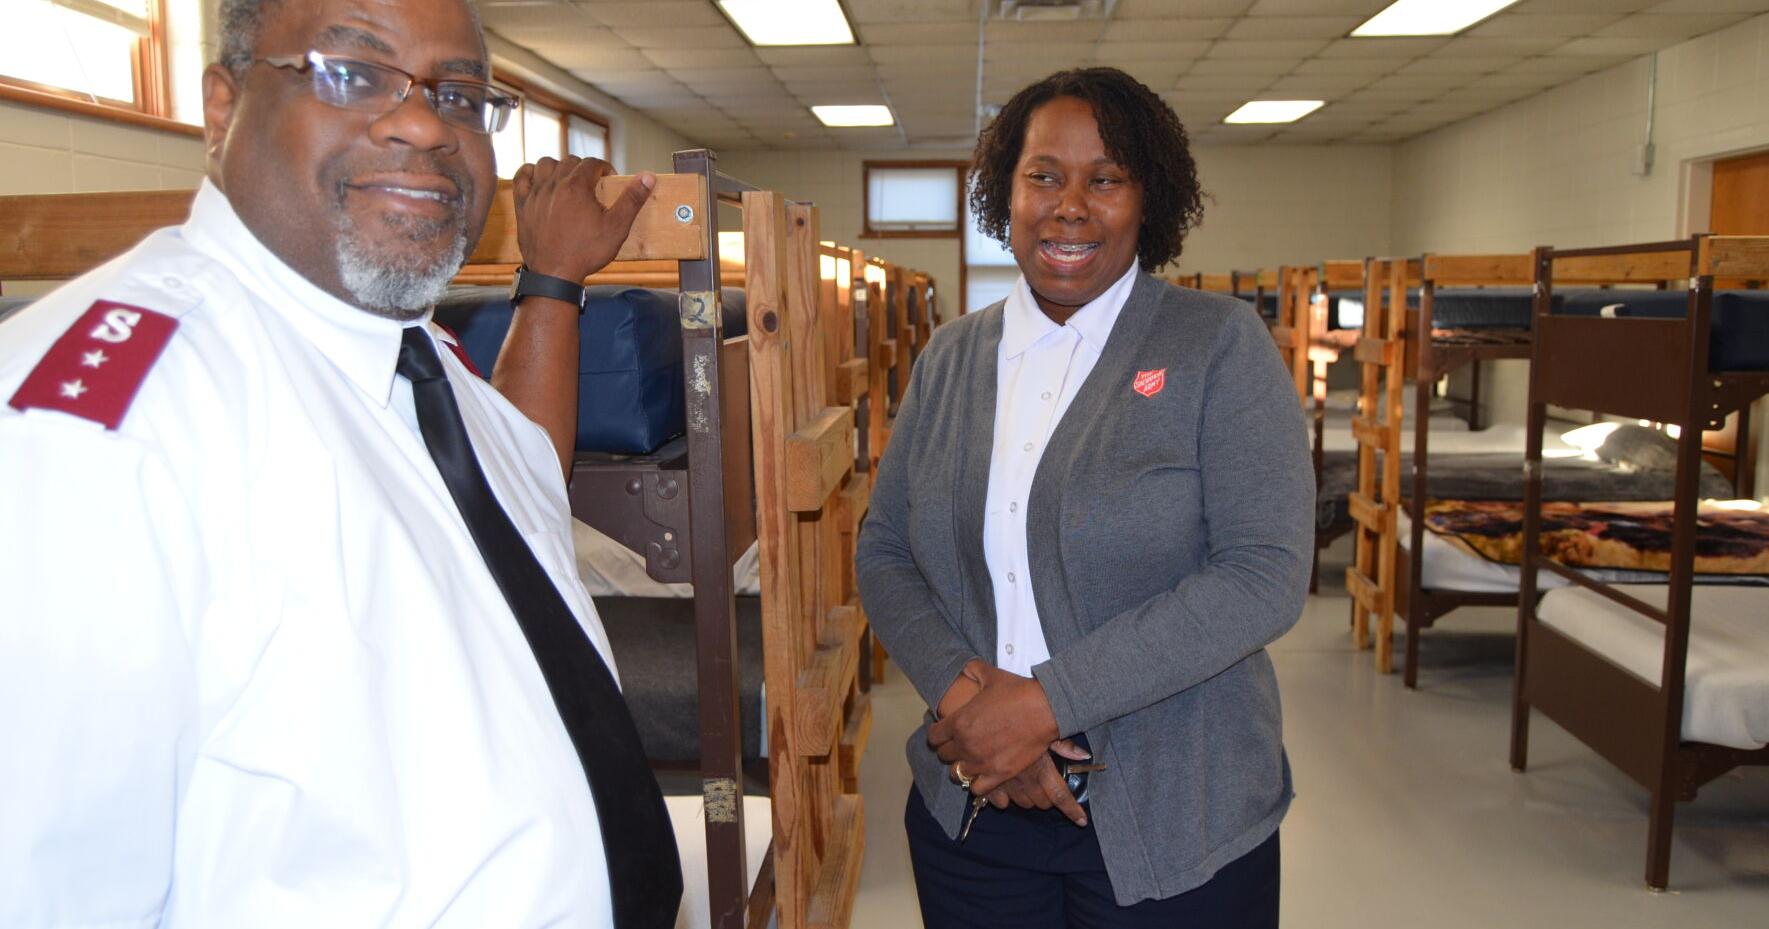 Salvation Army brings Chicago couple to minister in Albany